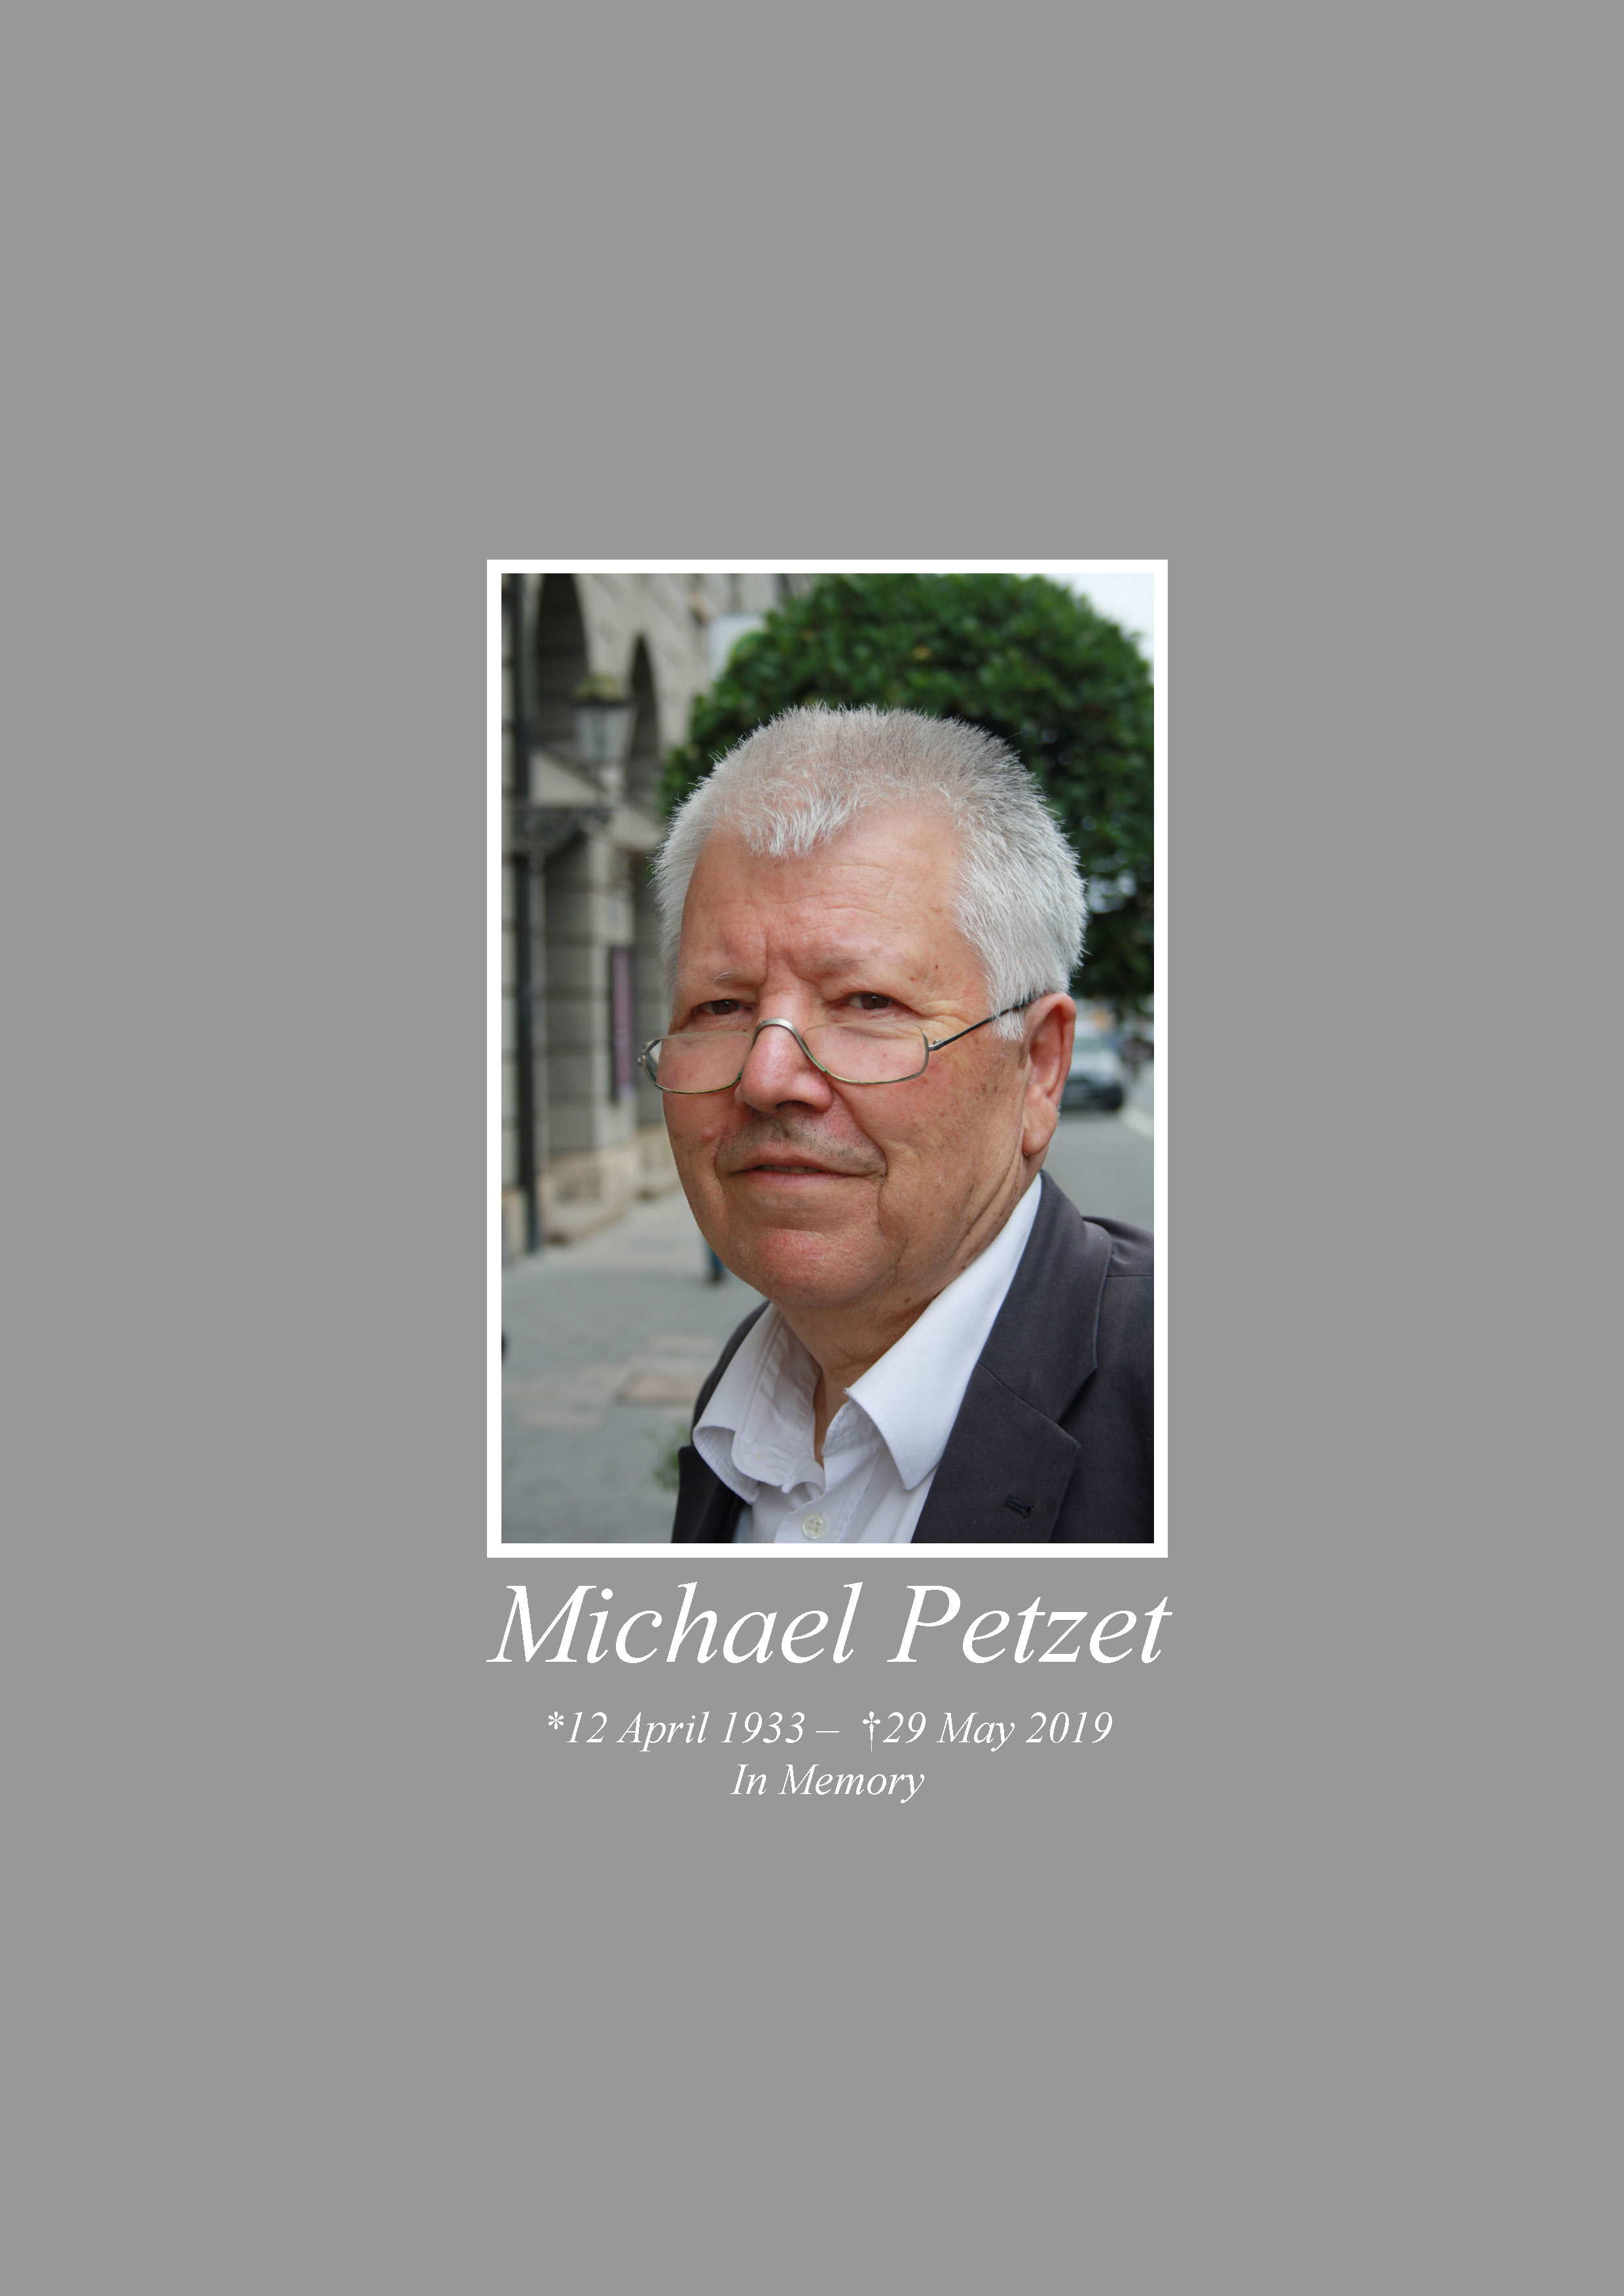 ICOMOS GErmany In Memory Michael PETZET Page 01